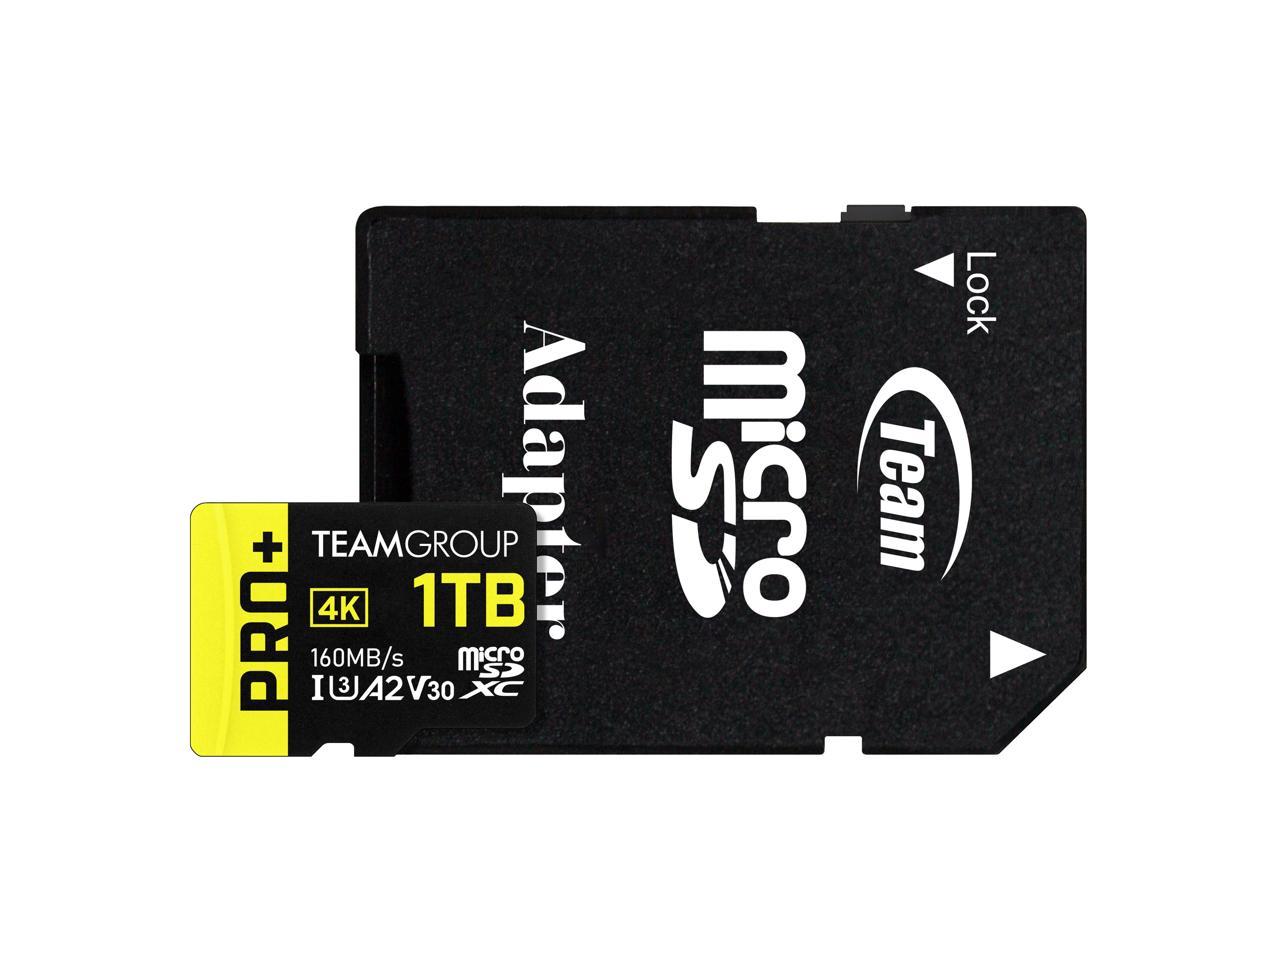 Team 1TB Pro+ microSDHC UHS-I/U3 Class 10 Memory Card with Adapter, Speed Up to 160MB/s (TPPMSDX1TIA2V3003) - image 3 of 4